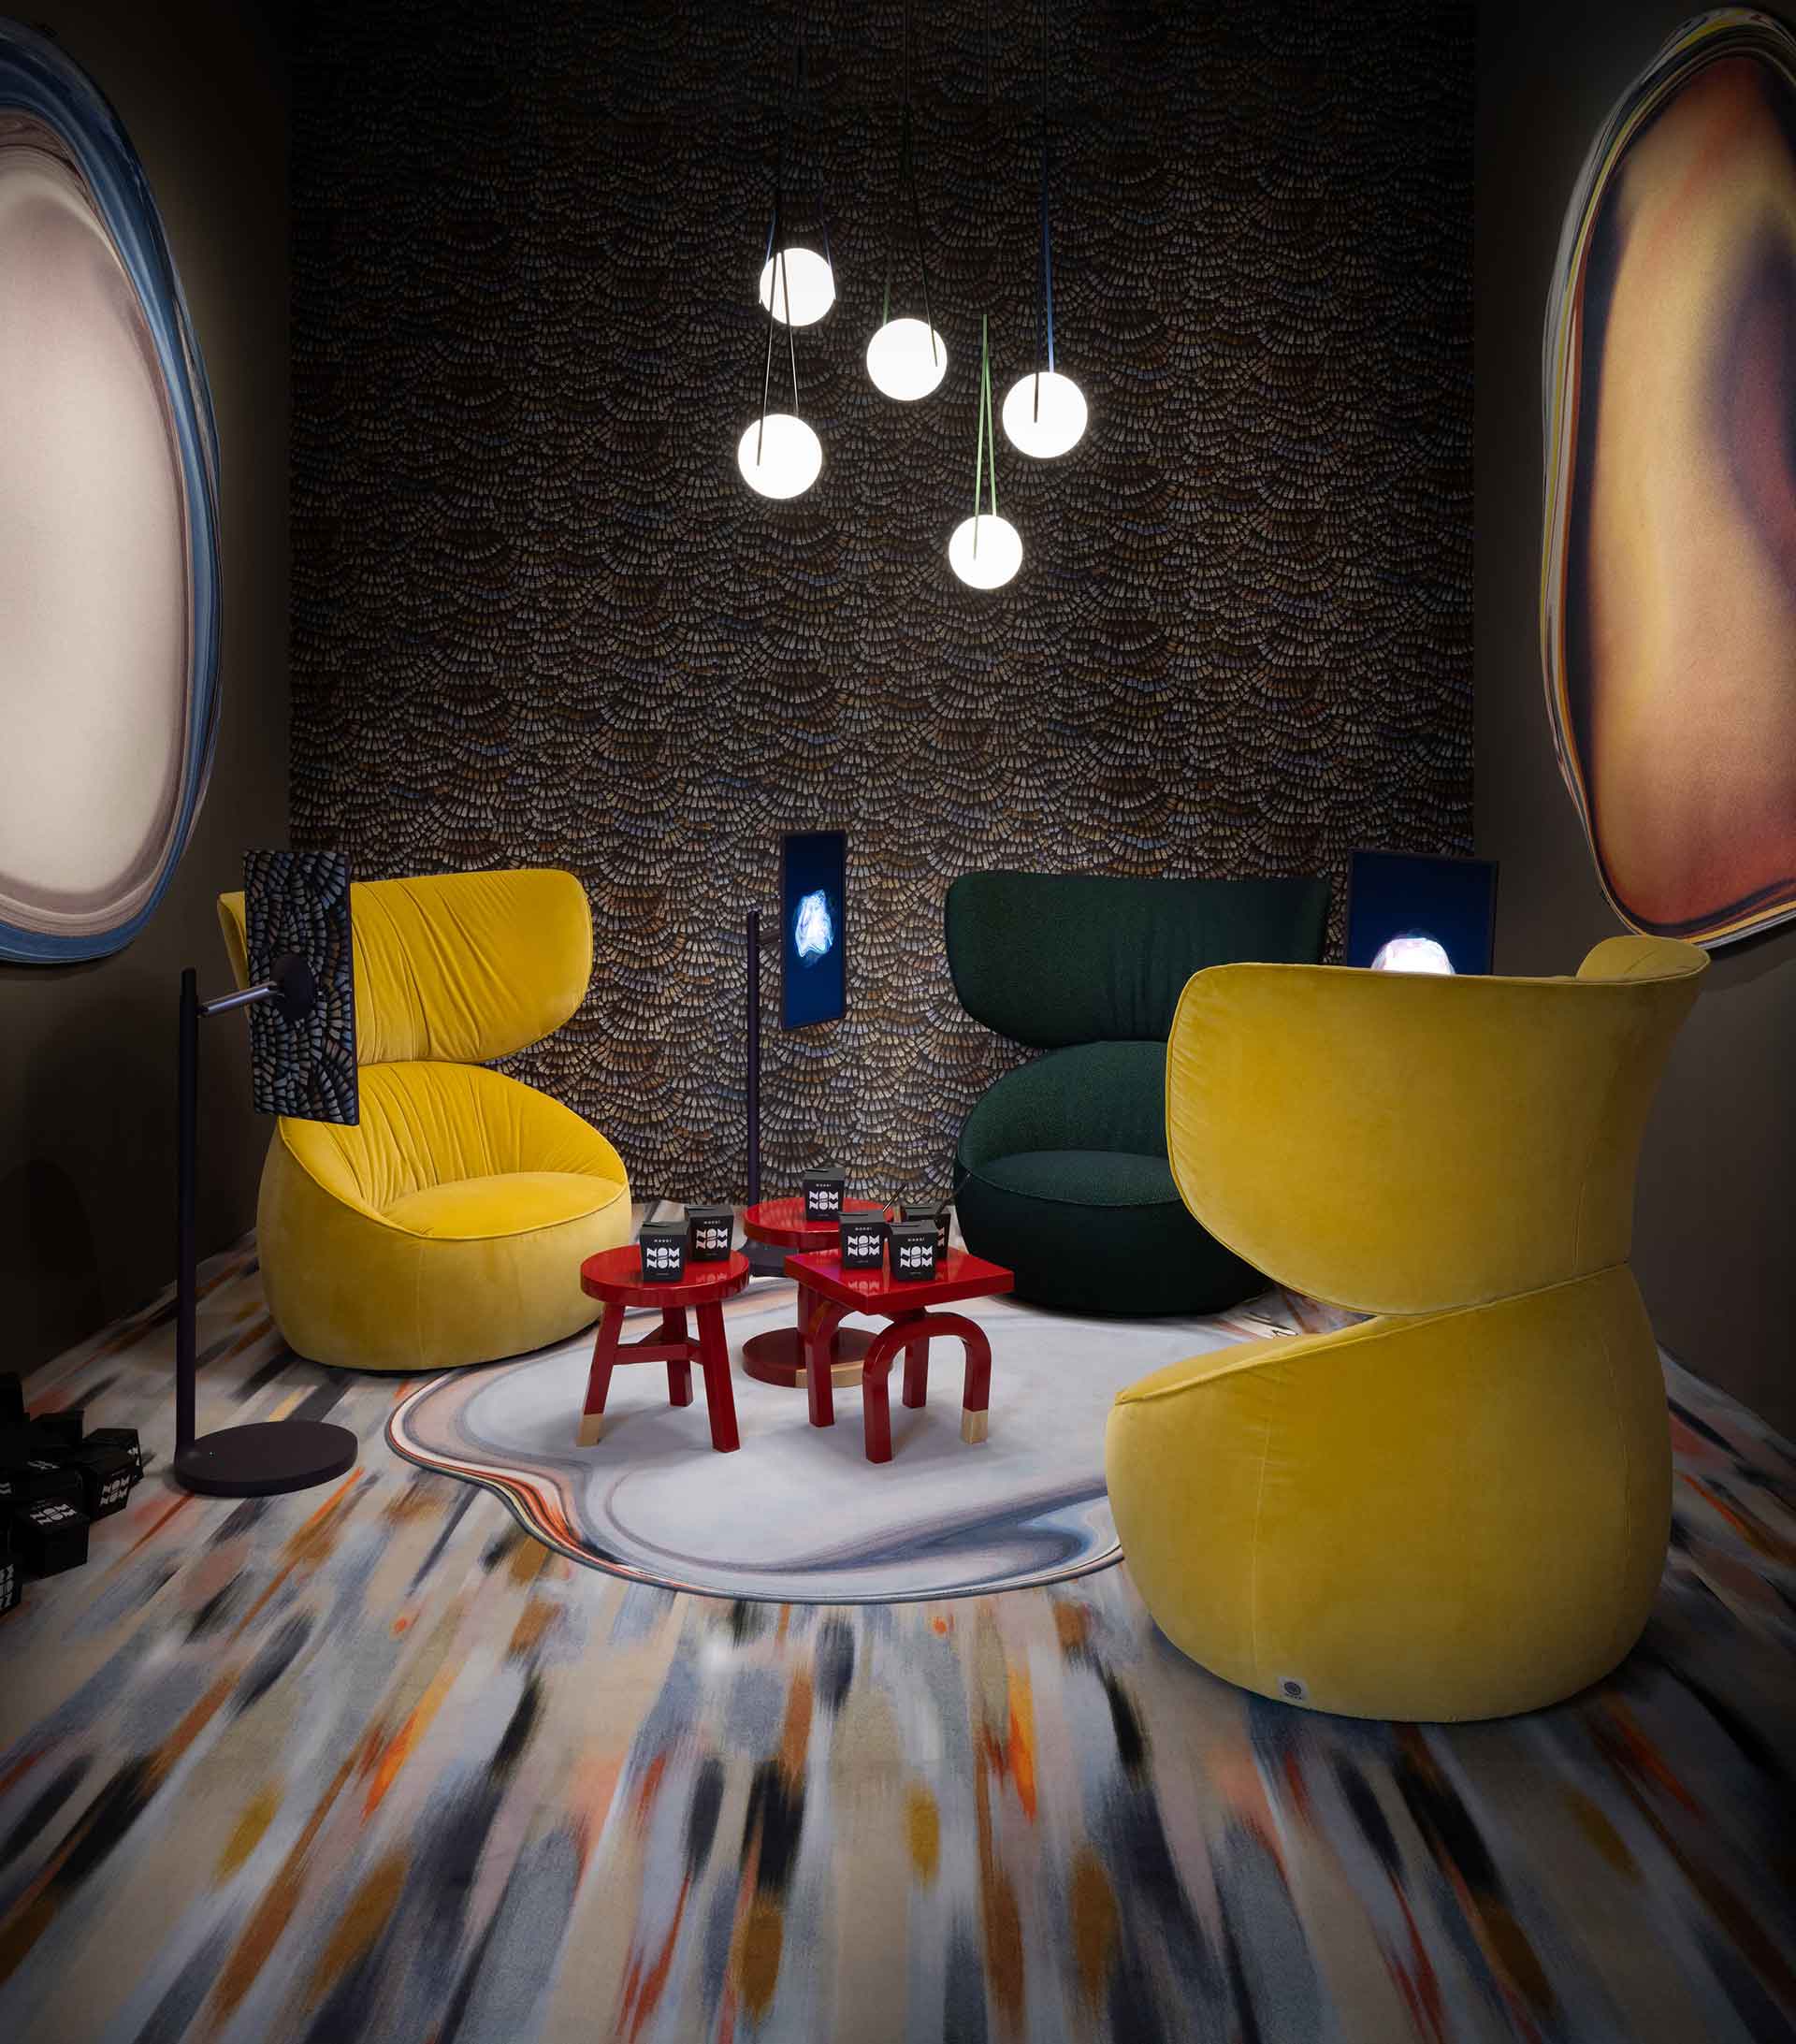 moooi immerses milan design week 2022 visitors in a life extraordinary